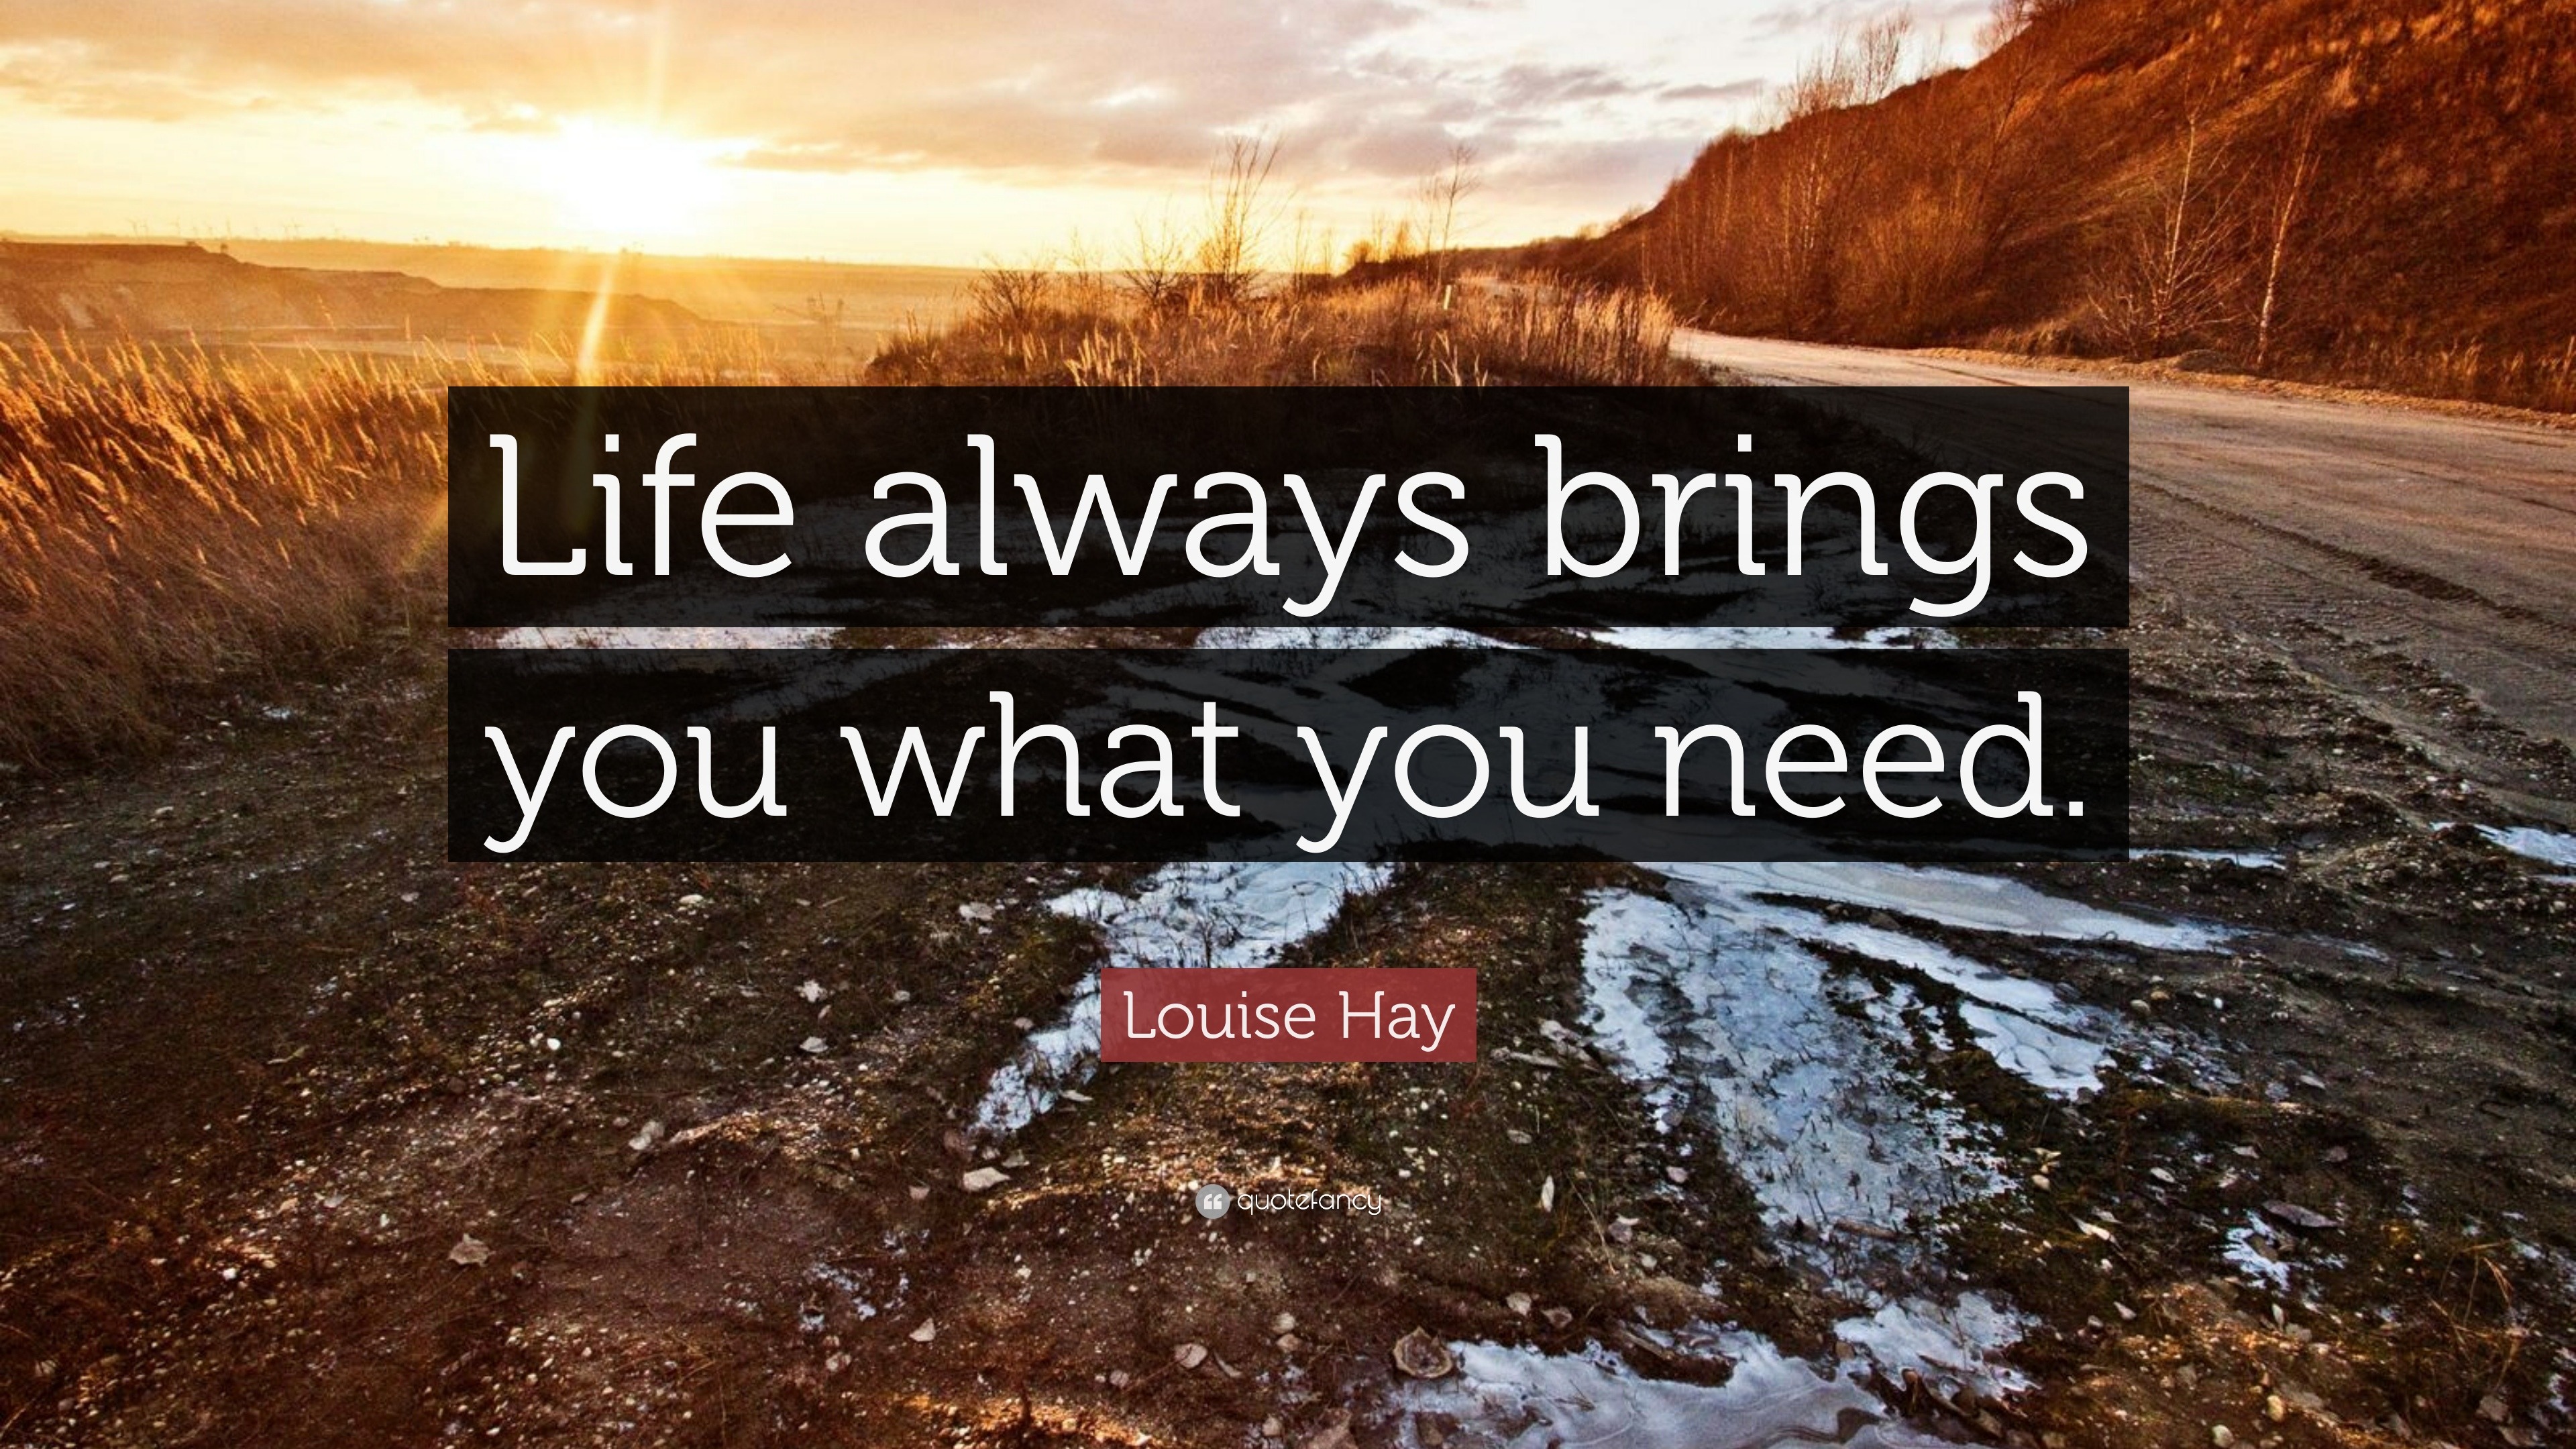 Louise Hay Quote: “Life always brings you what you need.”